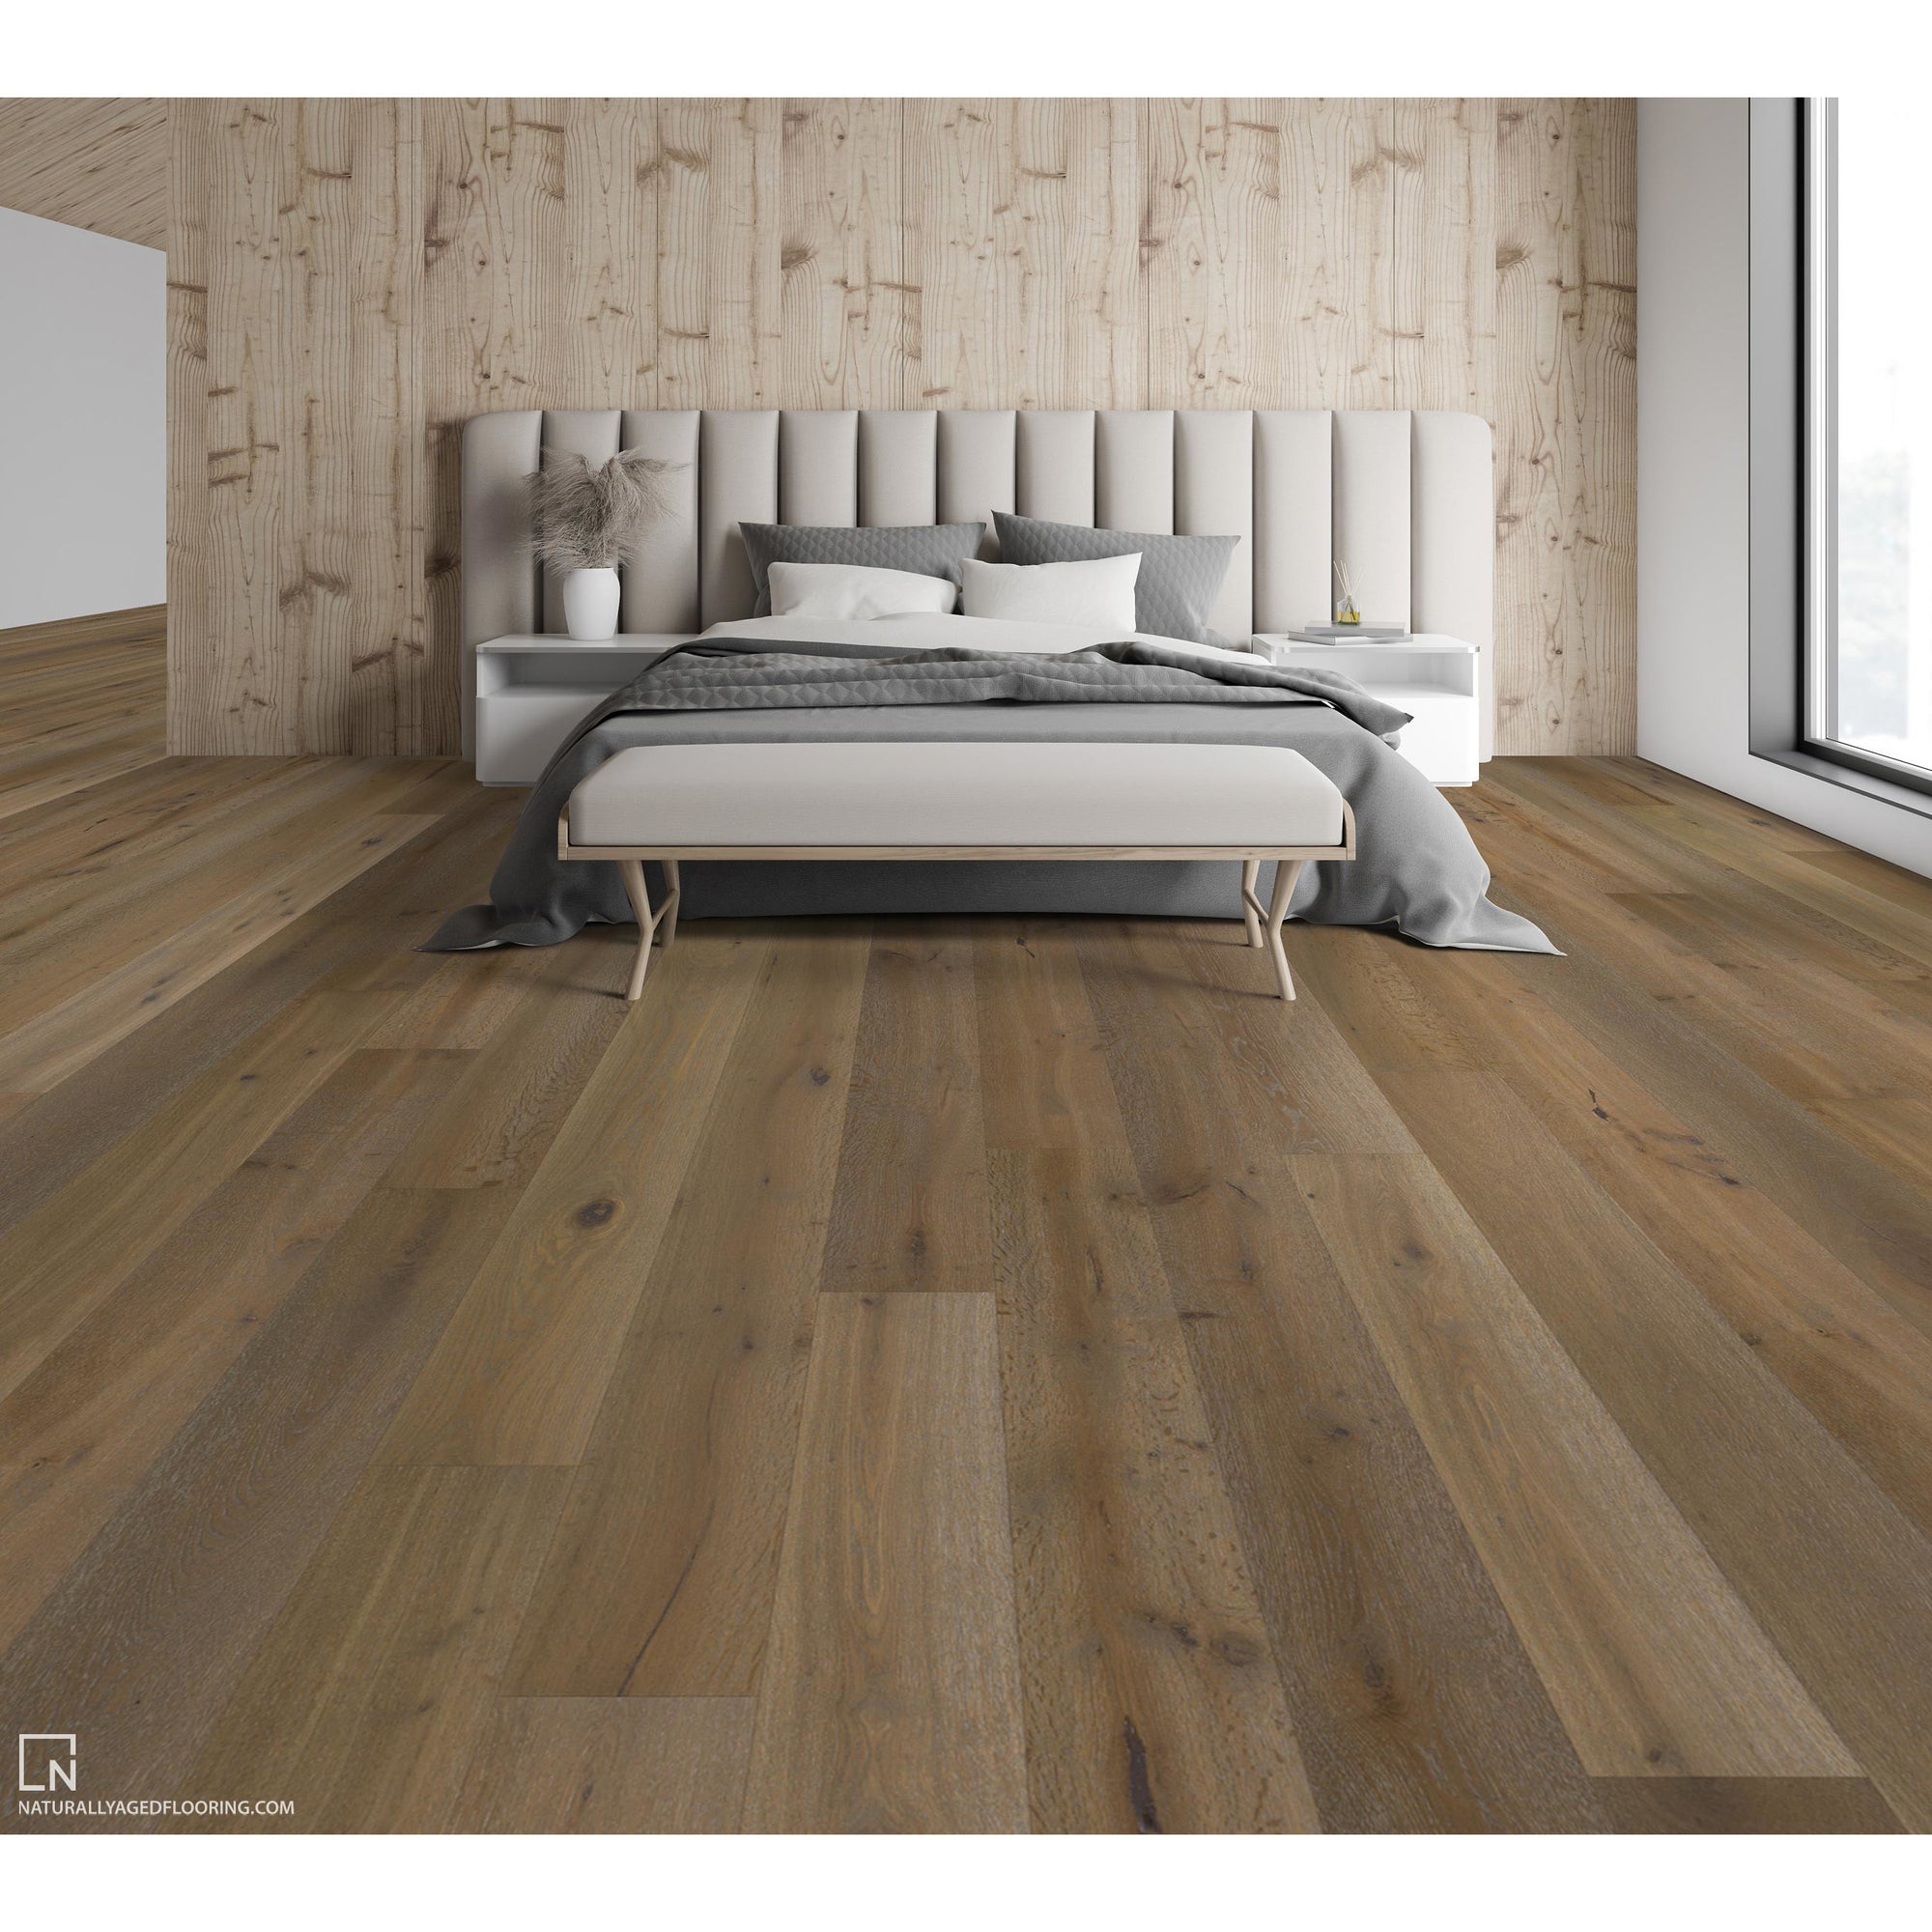 Naturally Aged Flooring - Pinnacle Collection - Capstone